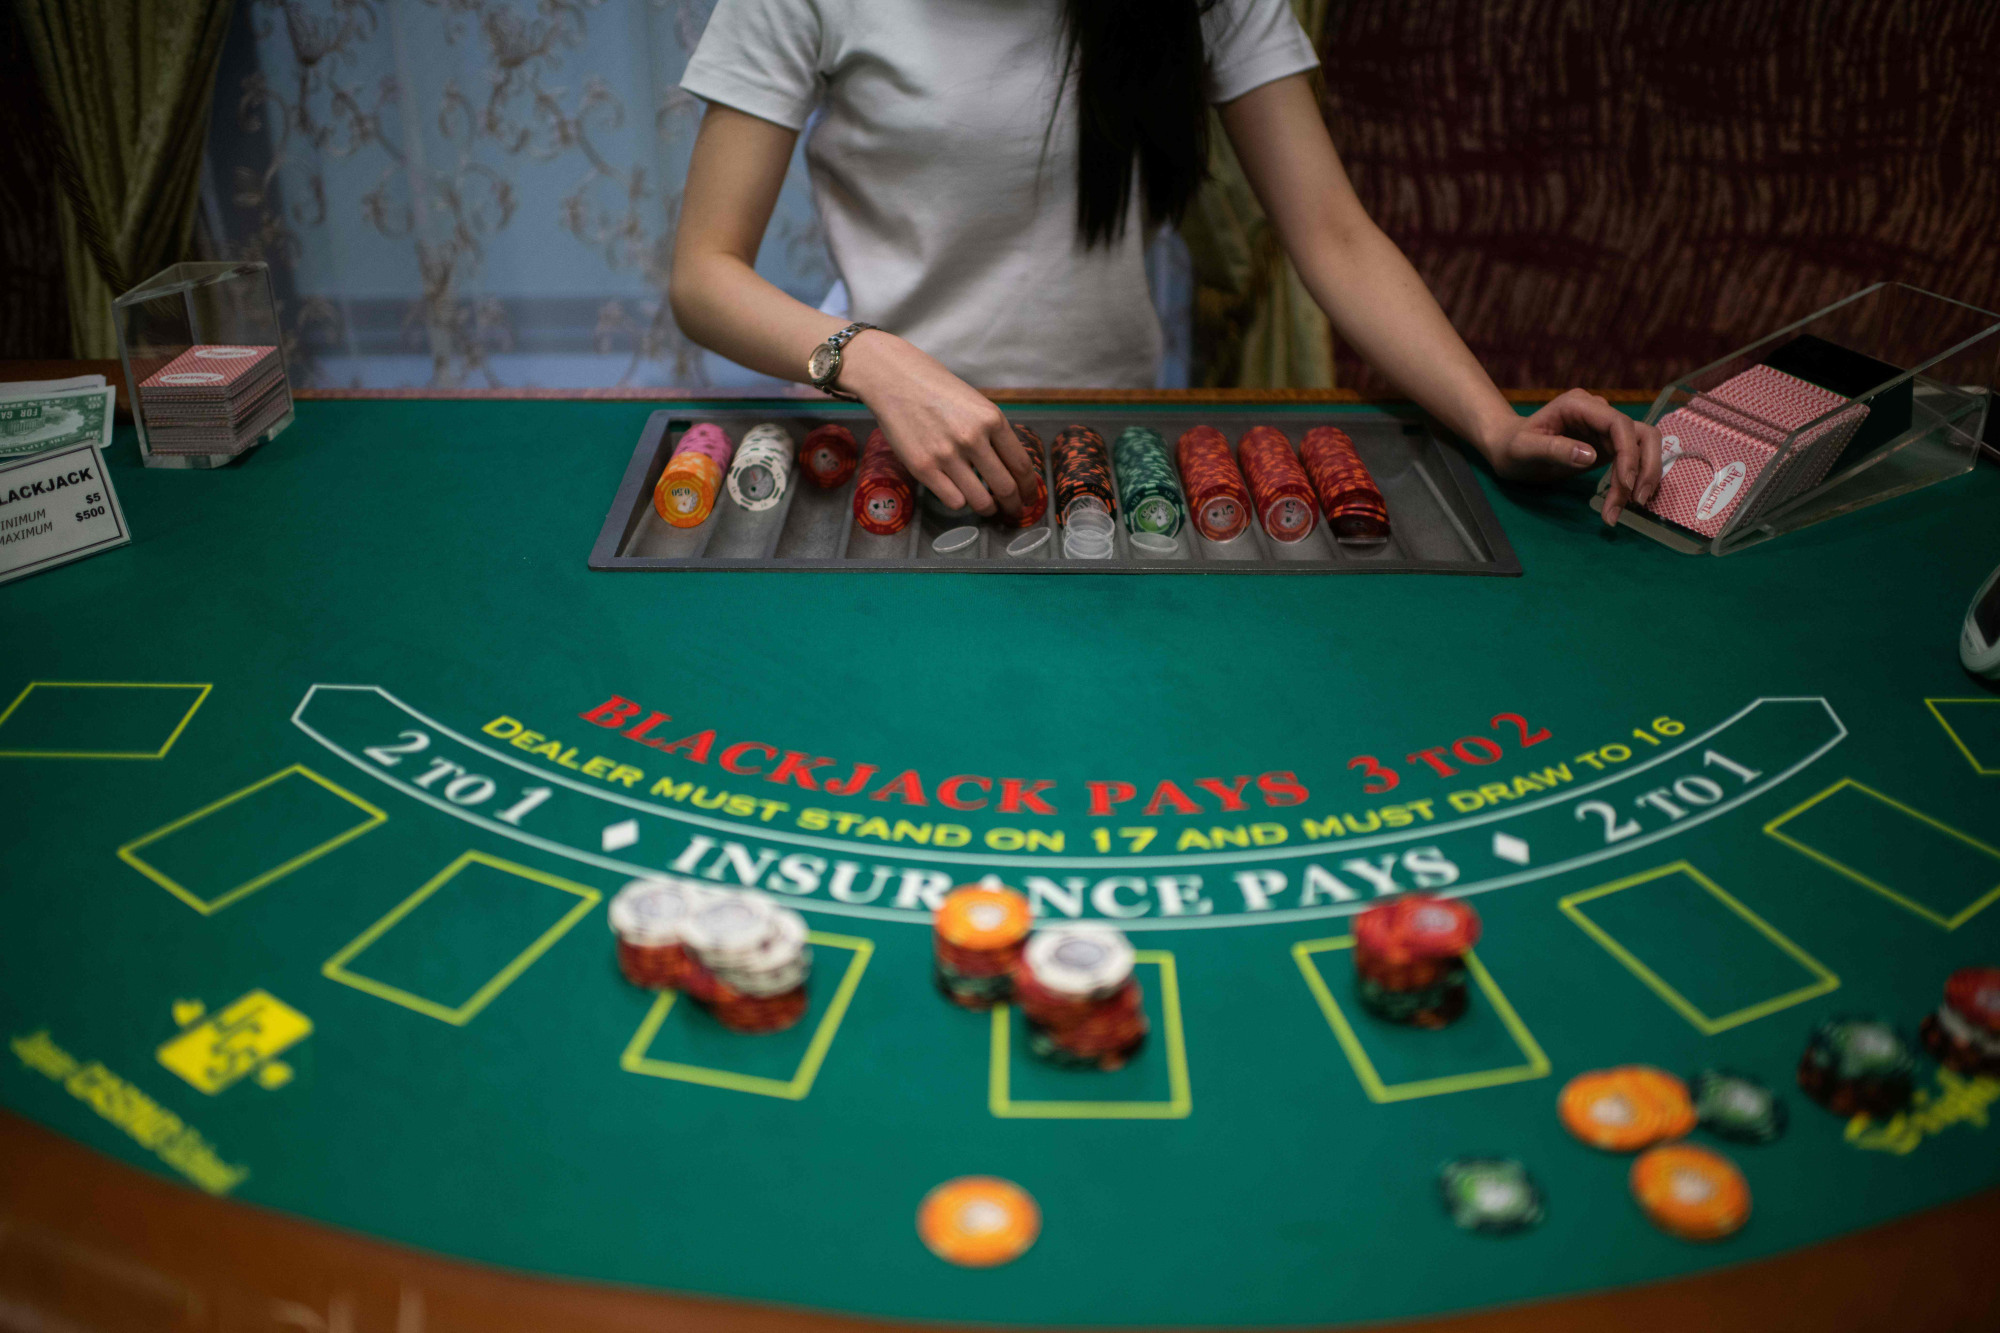 Advocates say integrated resorts, including casinos, will boost Japan's economy and tourism while critics worry that gambling addiction will become a growing problem. | AFP-JIJI